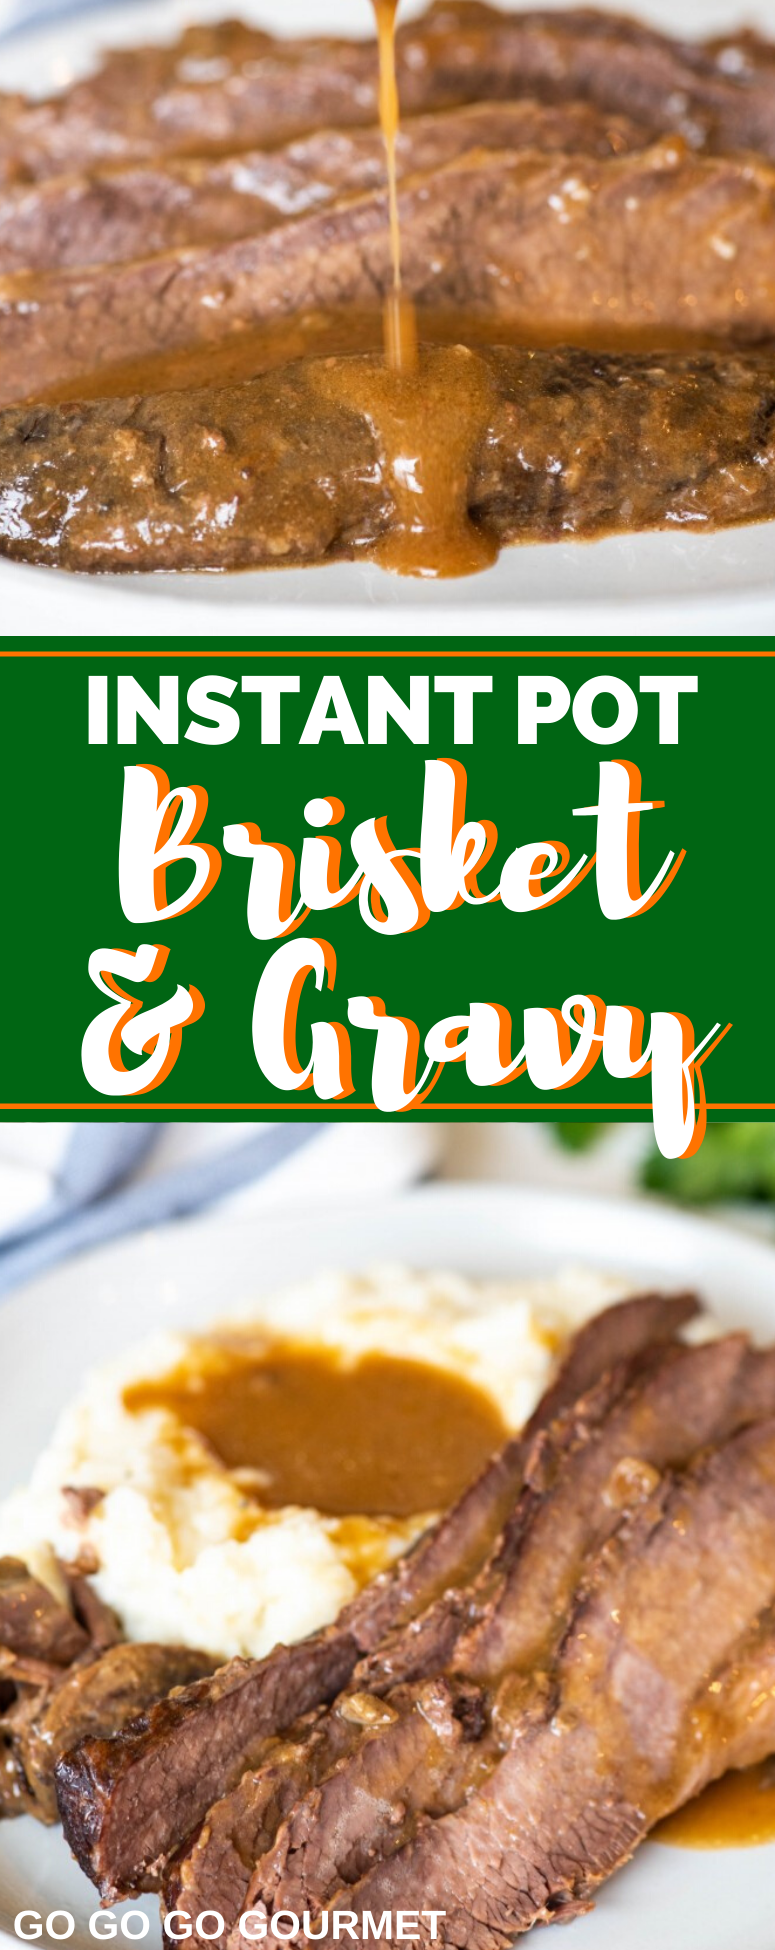 Pressure cooking just got a whole lot better thanks to this Instant Pot Tender Brisket and Gravy recipe! This easy brisket doesn't use BBQ or red wine, but rather soup and gravy mixes to give it an amazing flavor. You could even turn the leftovers into tacos! #gogogogourmet #instantpotbrisketandgravy #easyinstantpotrecipes #pressurecookerrecipes via @gogogogourmet